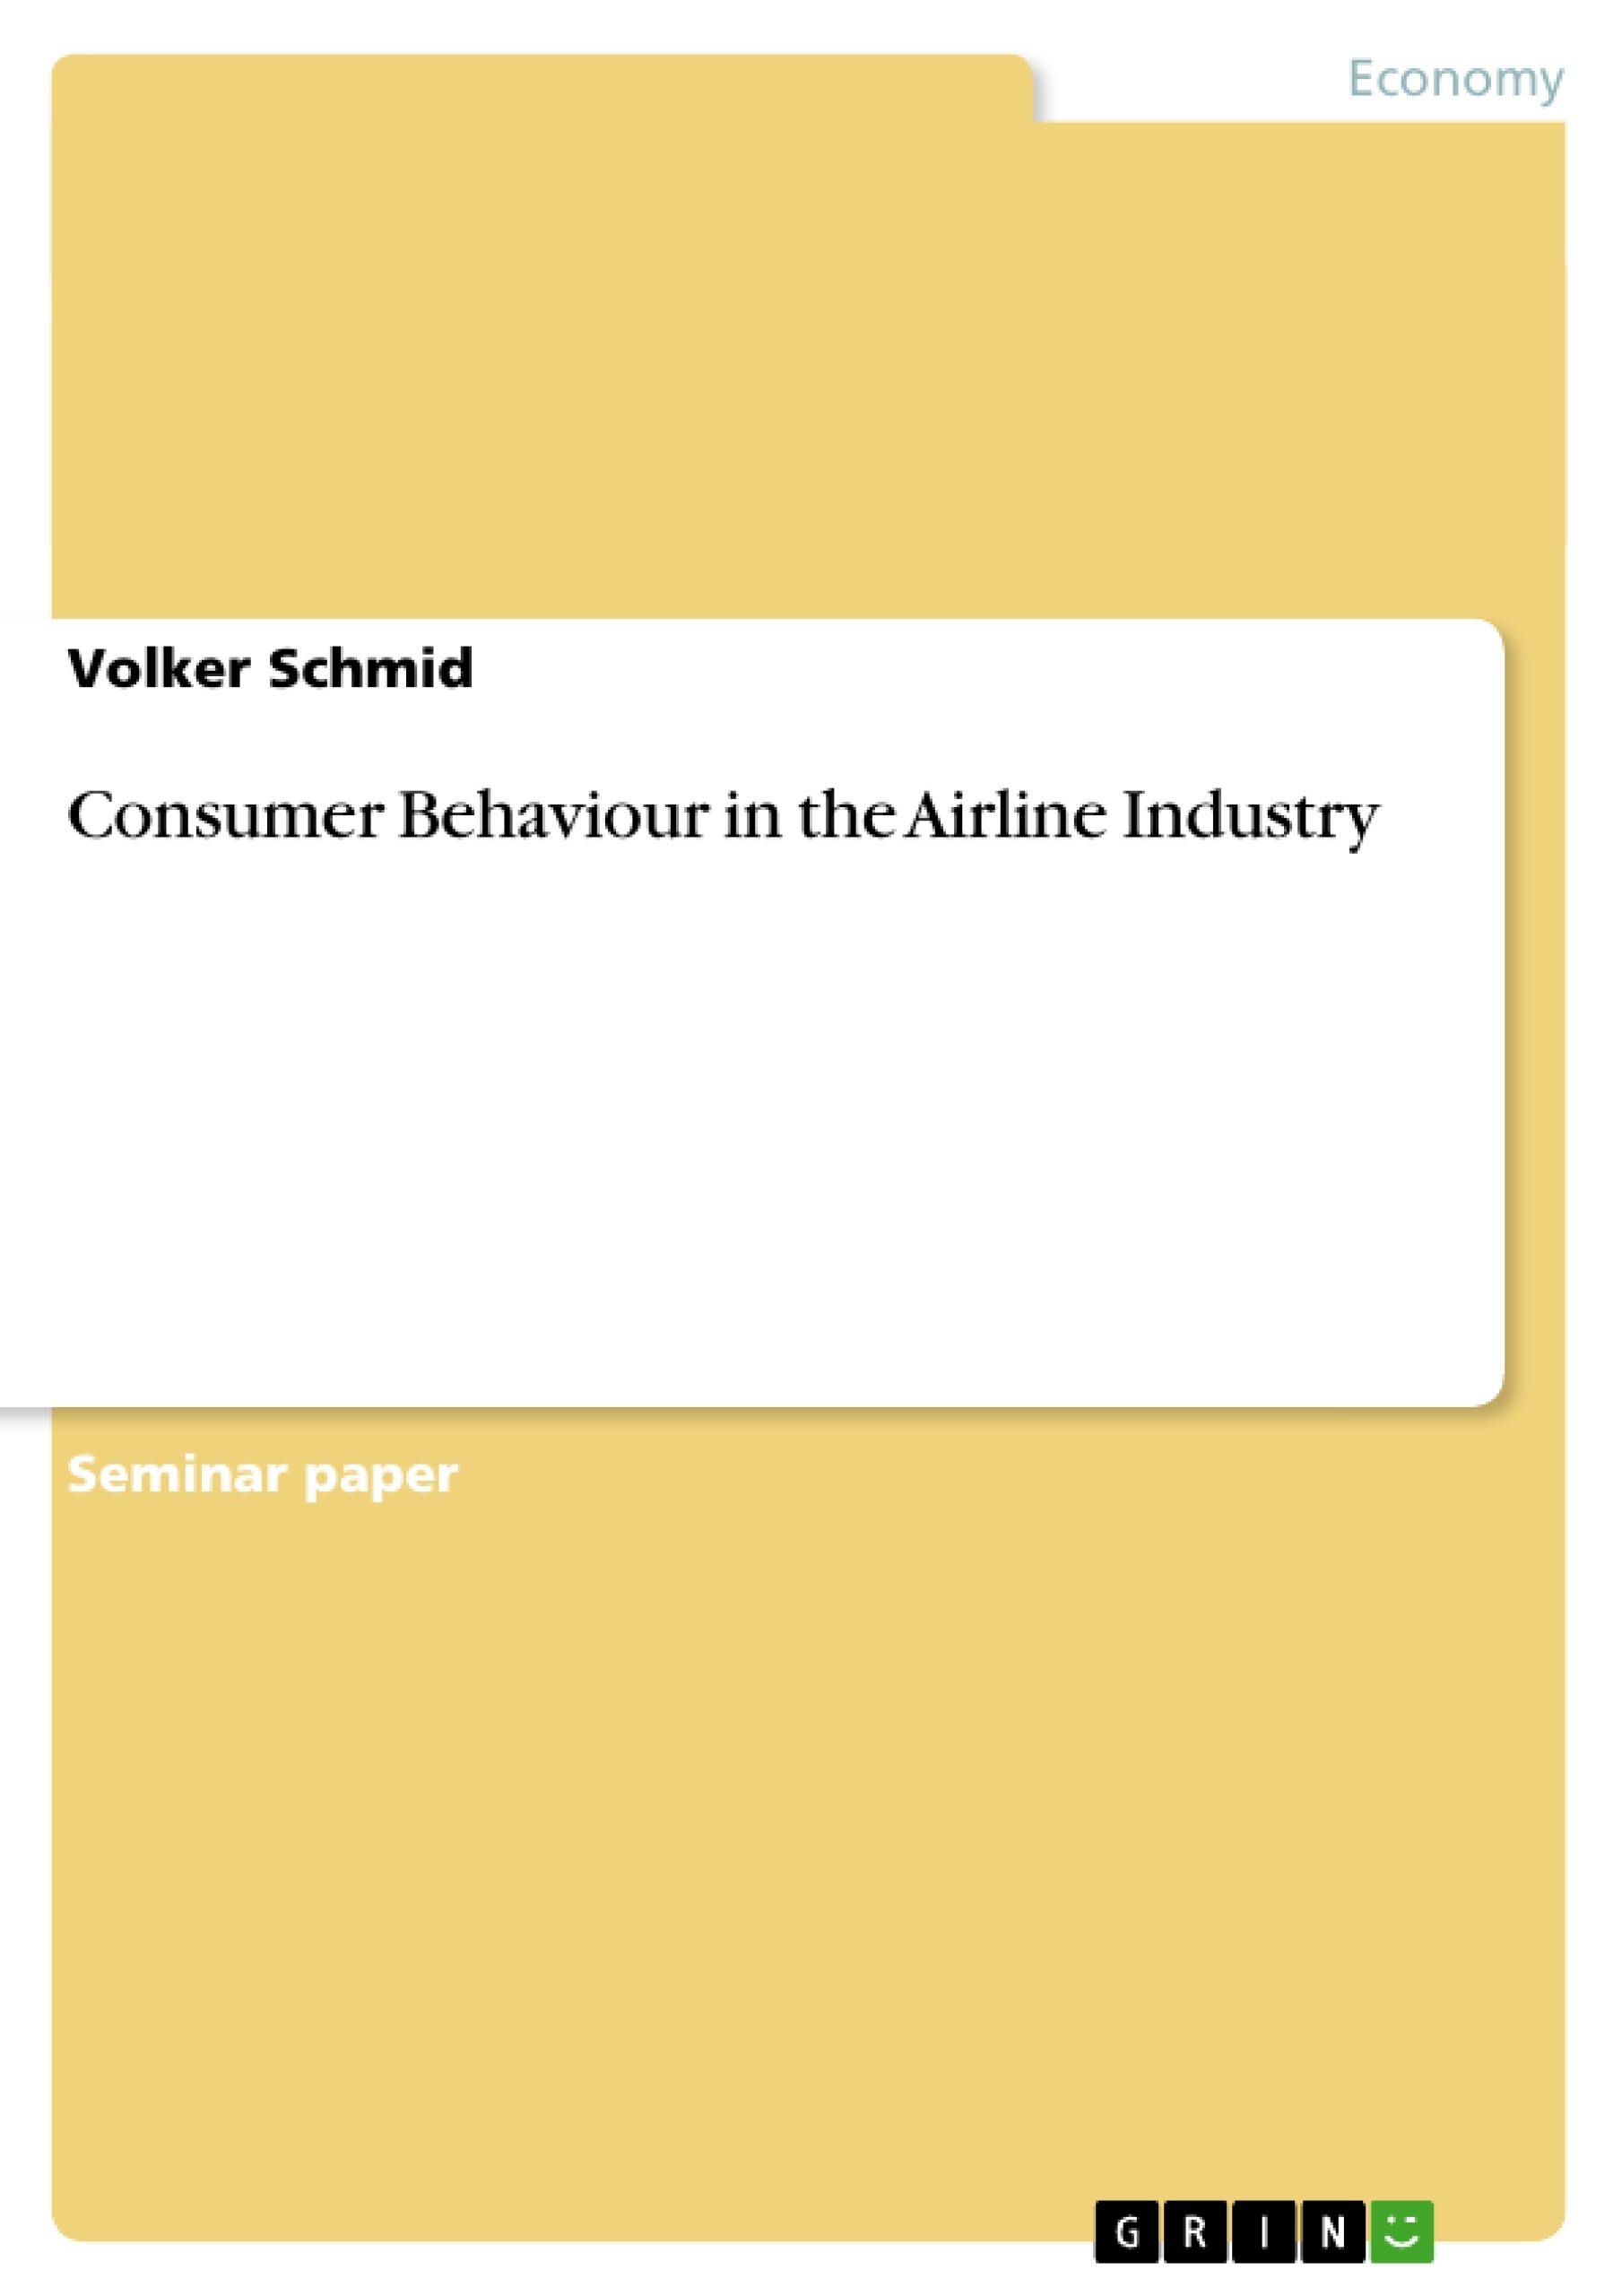 Title: Consumer Behaviour in the Airline Industry